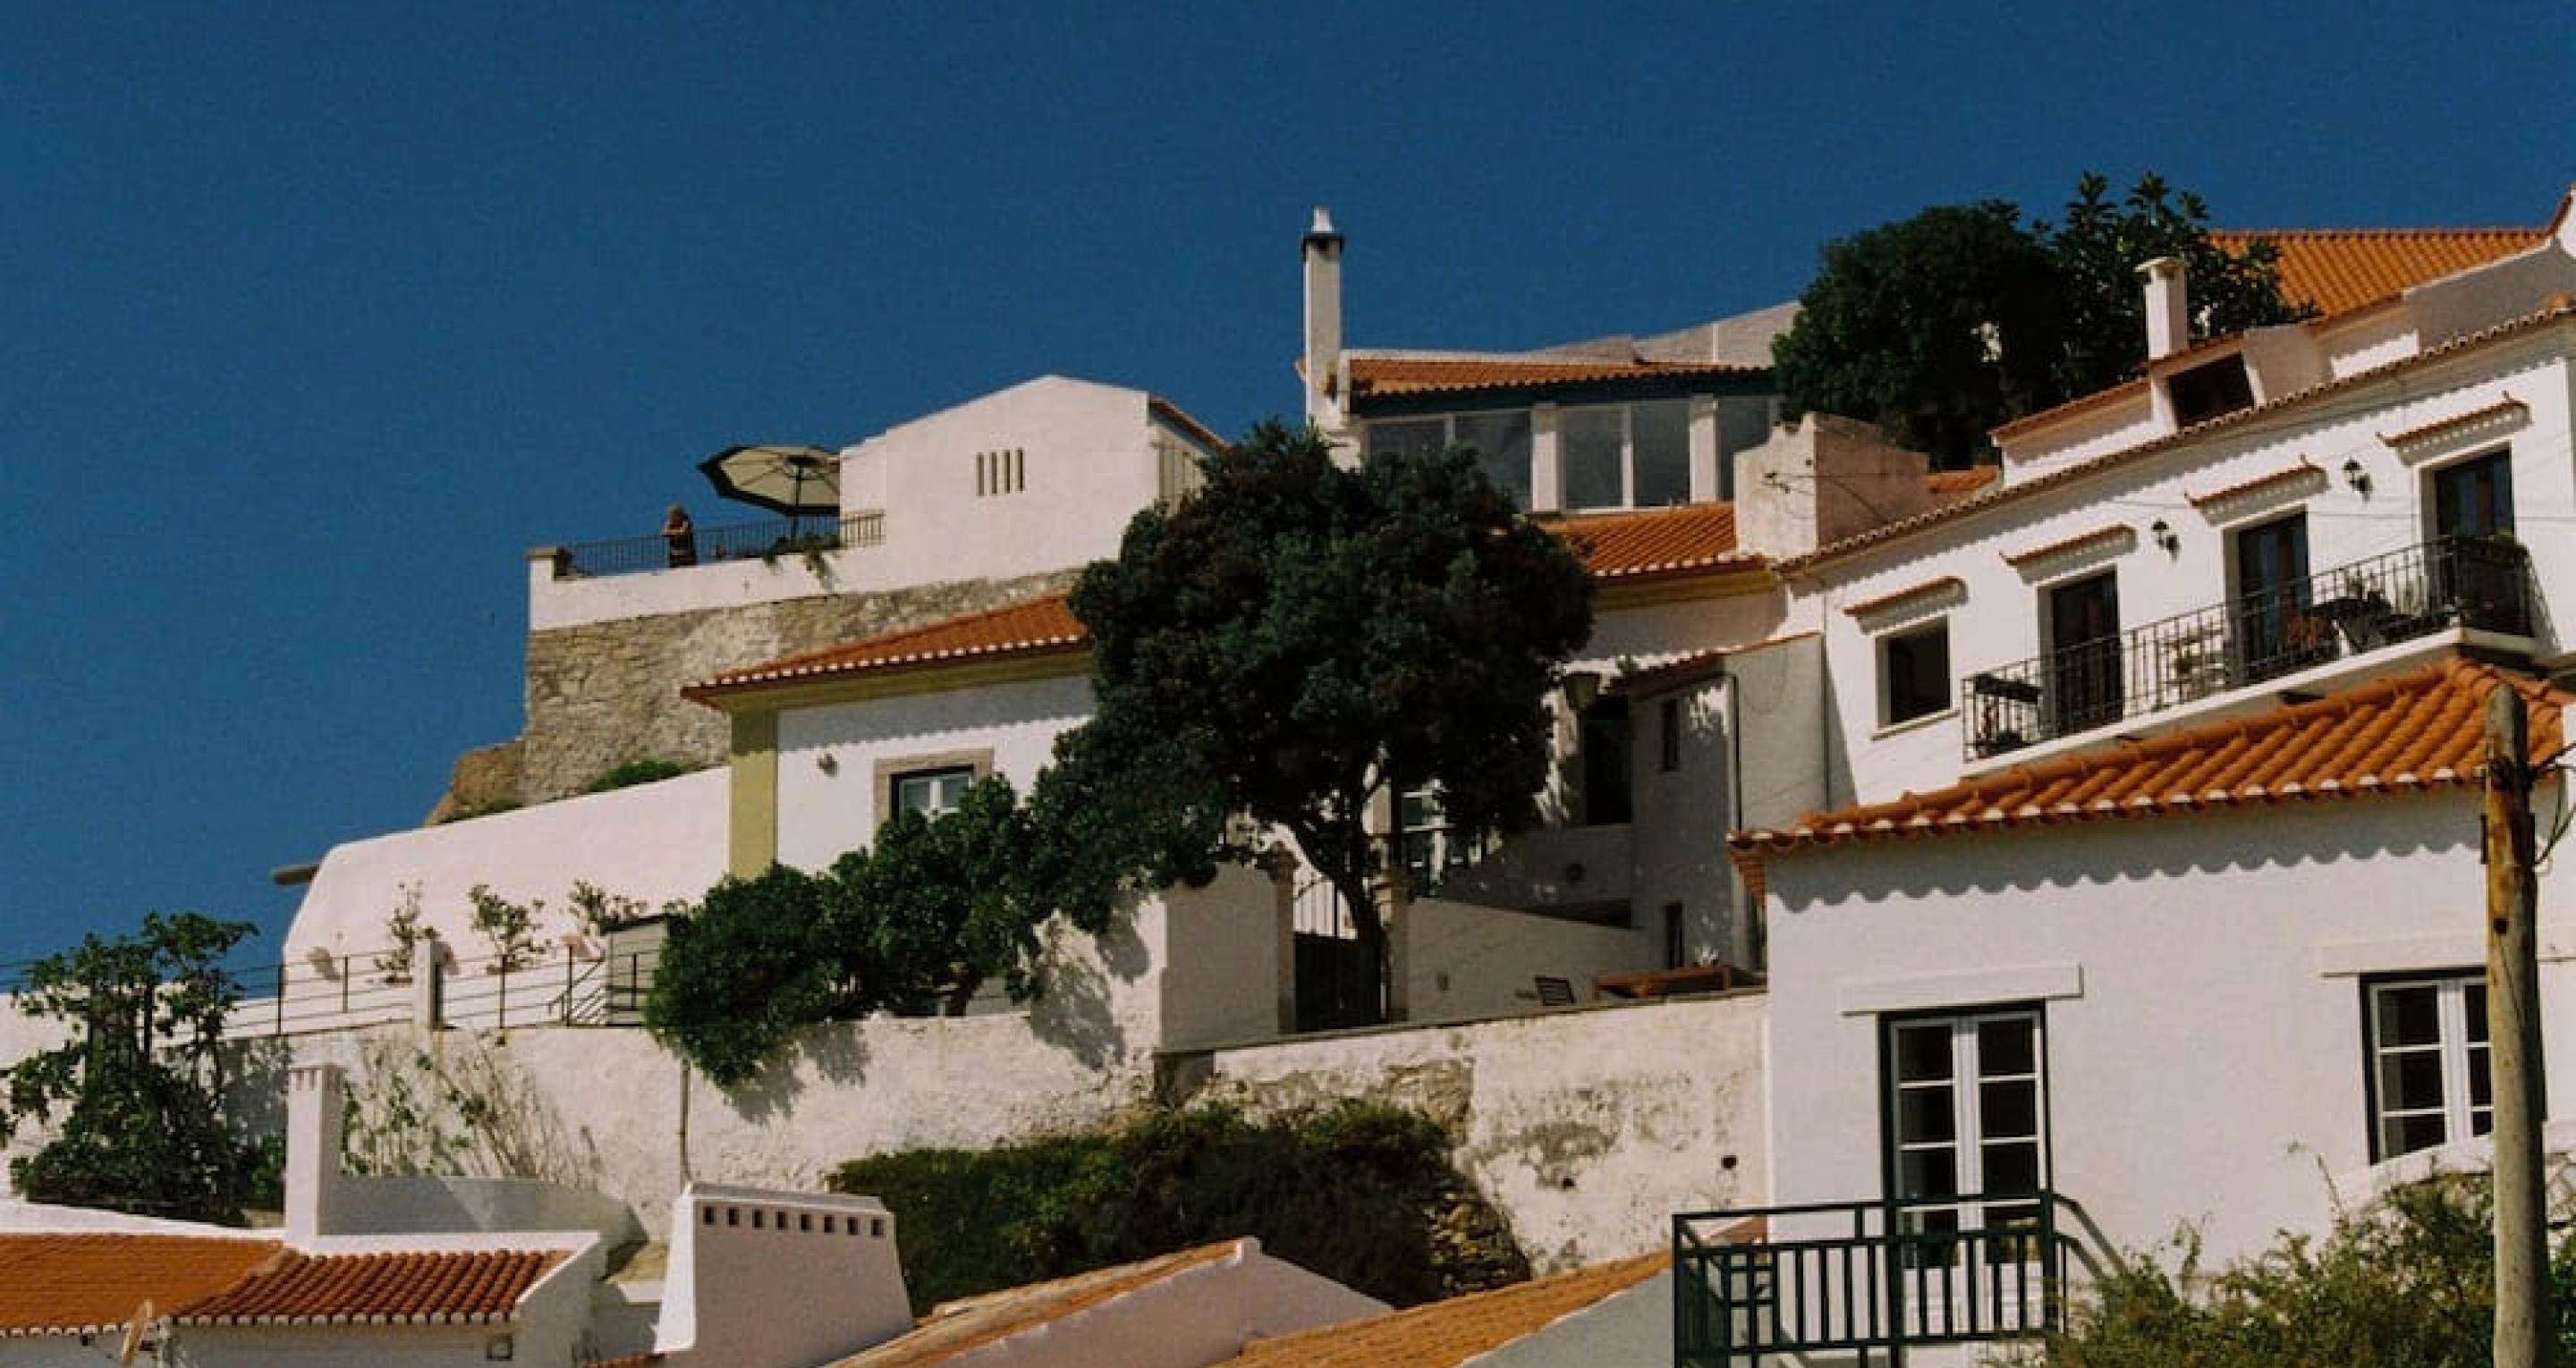 a hillside collection of white stucco houses with red tiled roofs